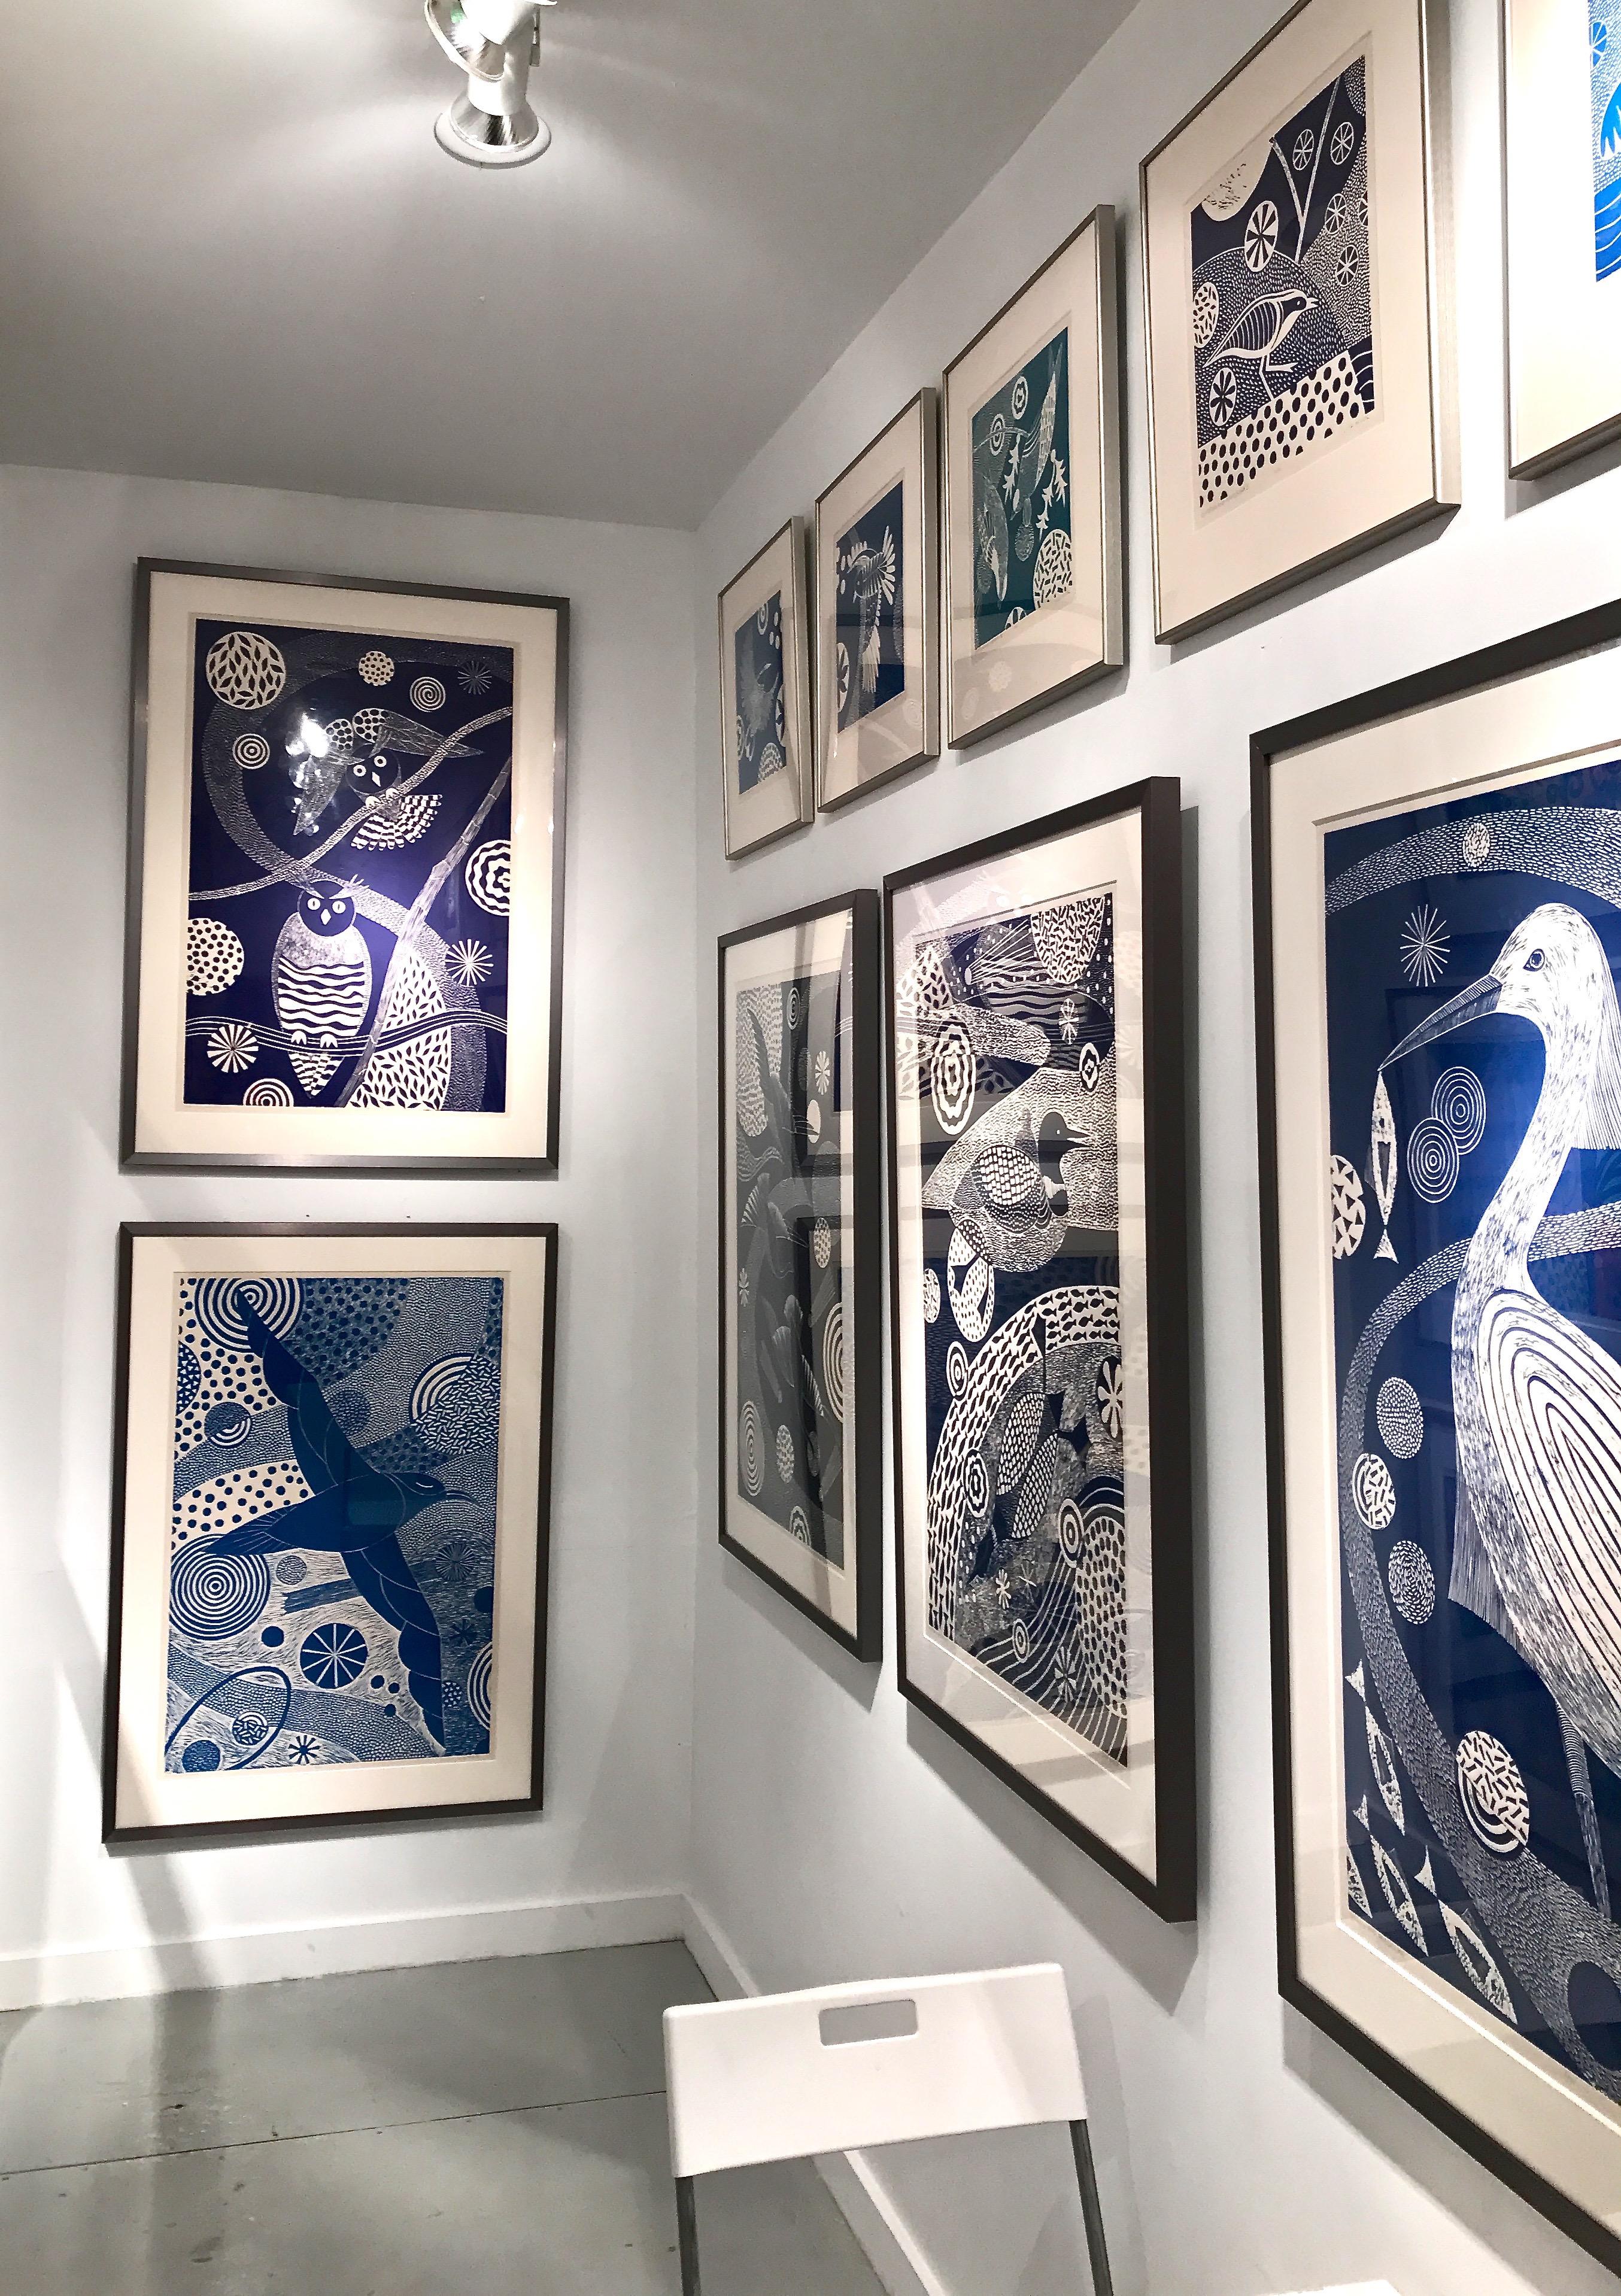 'Preening and Posing'  Linoleum Block Print, Edition 10,  35 1/4 x 23 1/4 Inches, is one of a series of 8 related prints in this size in varying shades of blue.   Sold individually or as sets of 2, 3, 4, 5, 6, 7 or 8. 

There is also a separate